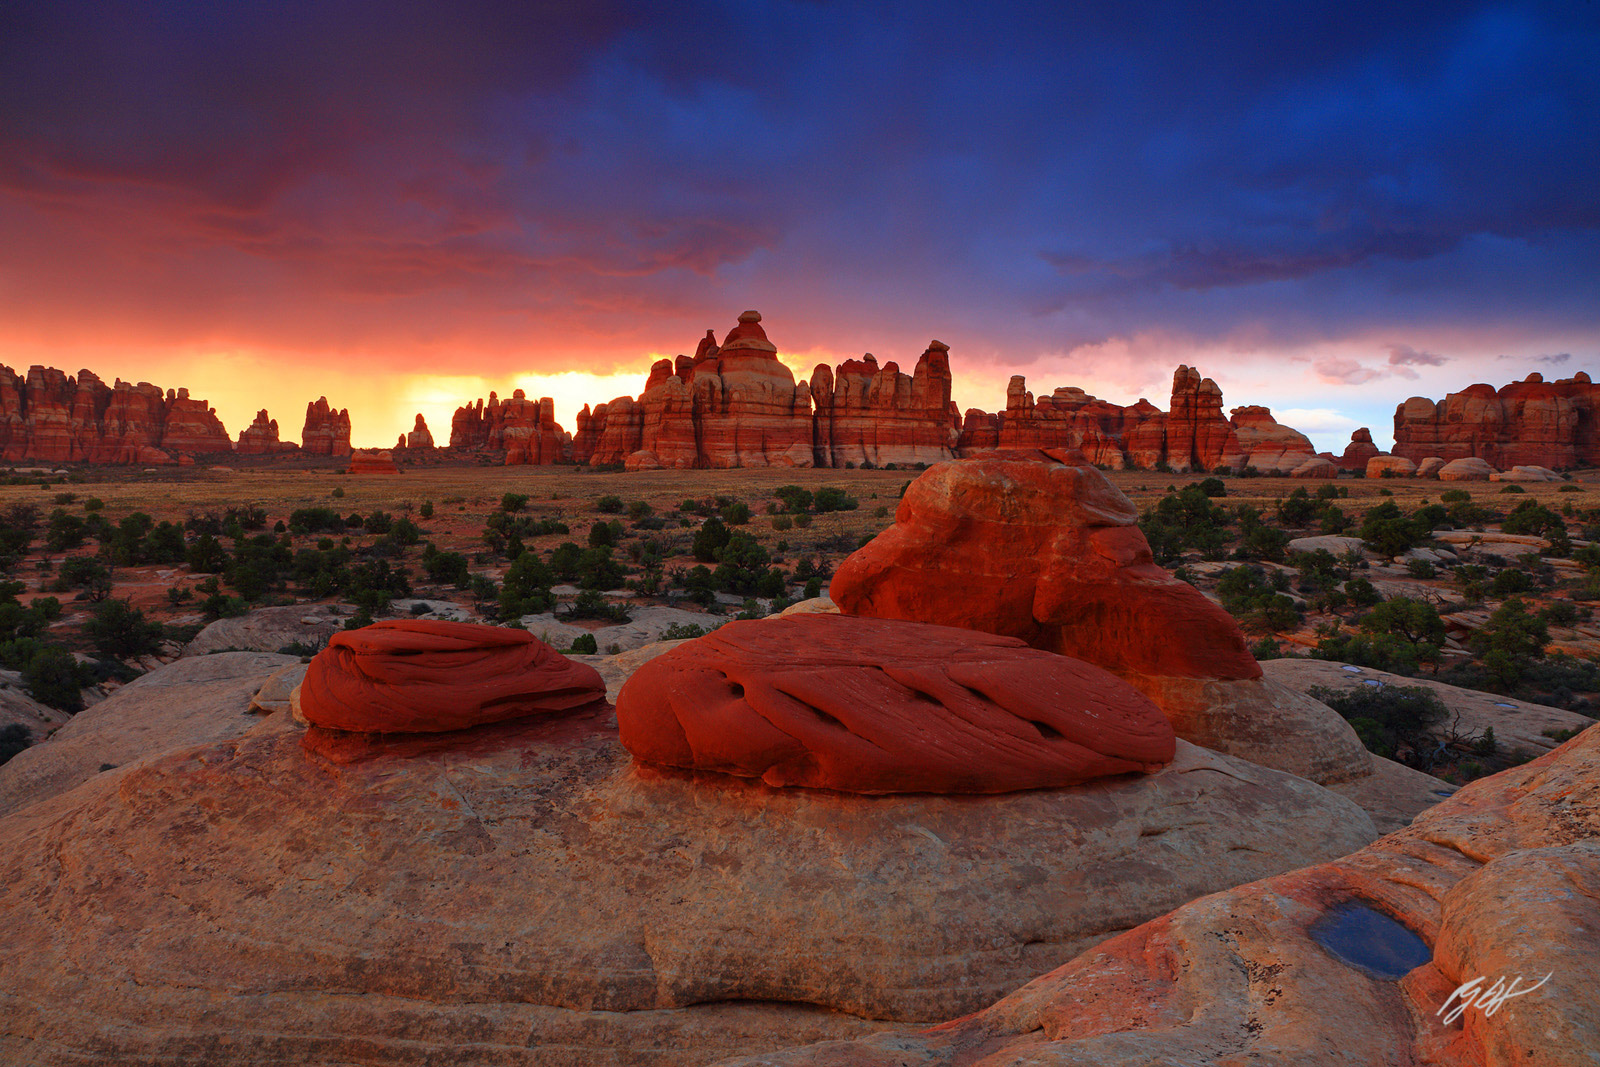 Sunset after a Thunderstorm with the Needles in Chesler Park in Canyonlands National Park in Utah